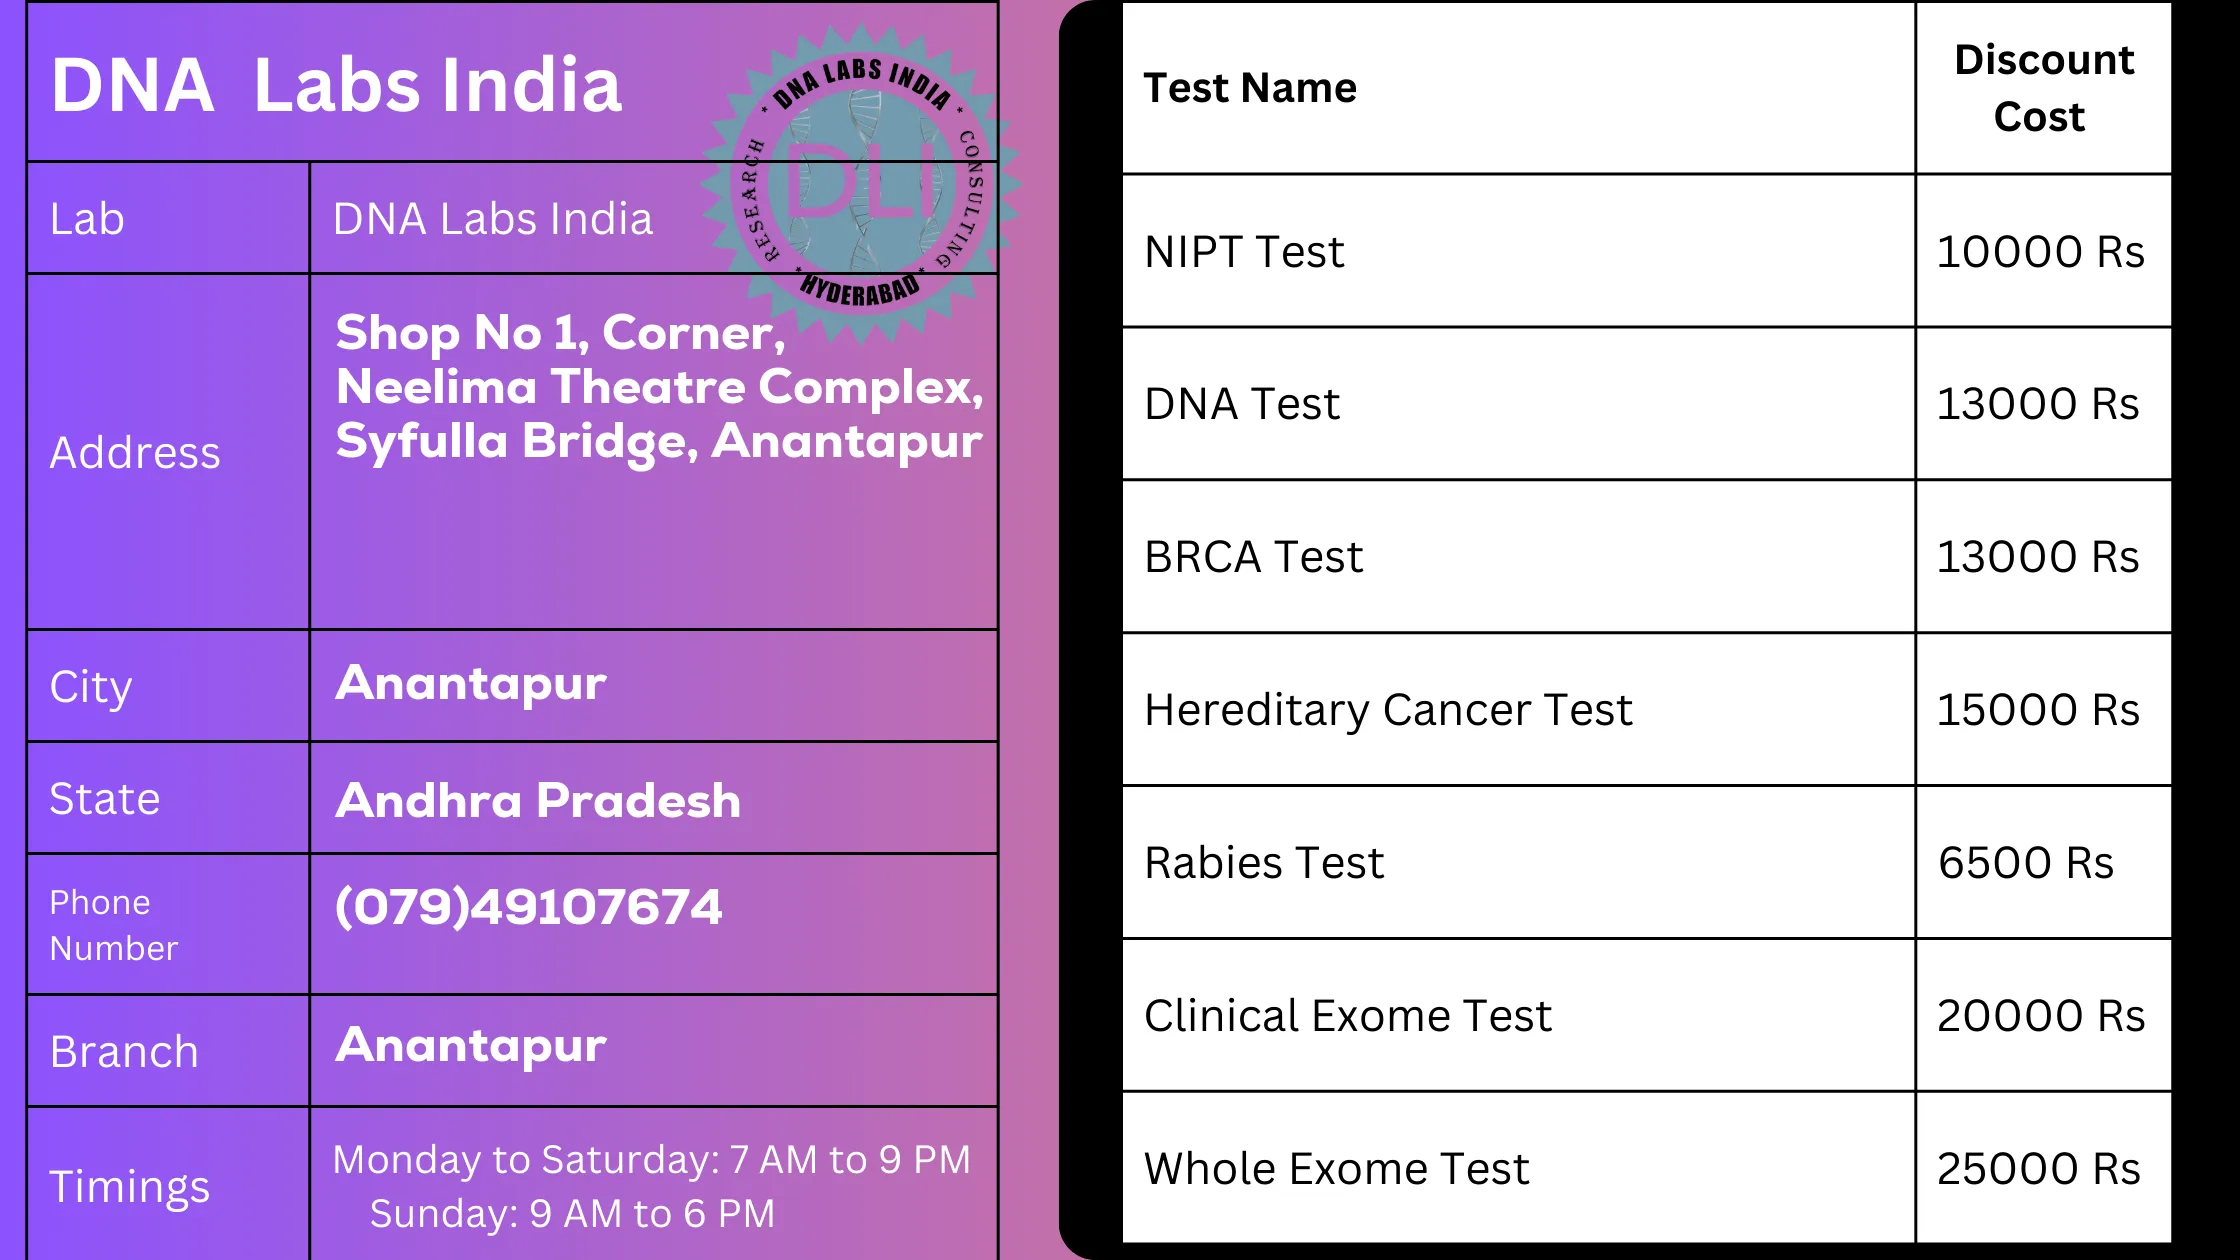 DNA Labs India in Anantapur: Get 20% Off on Tests